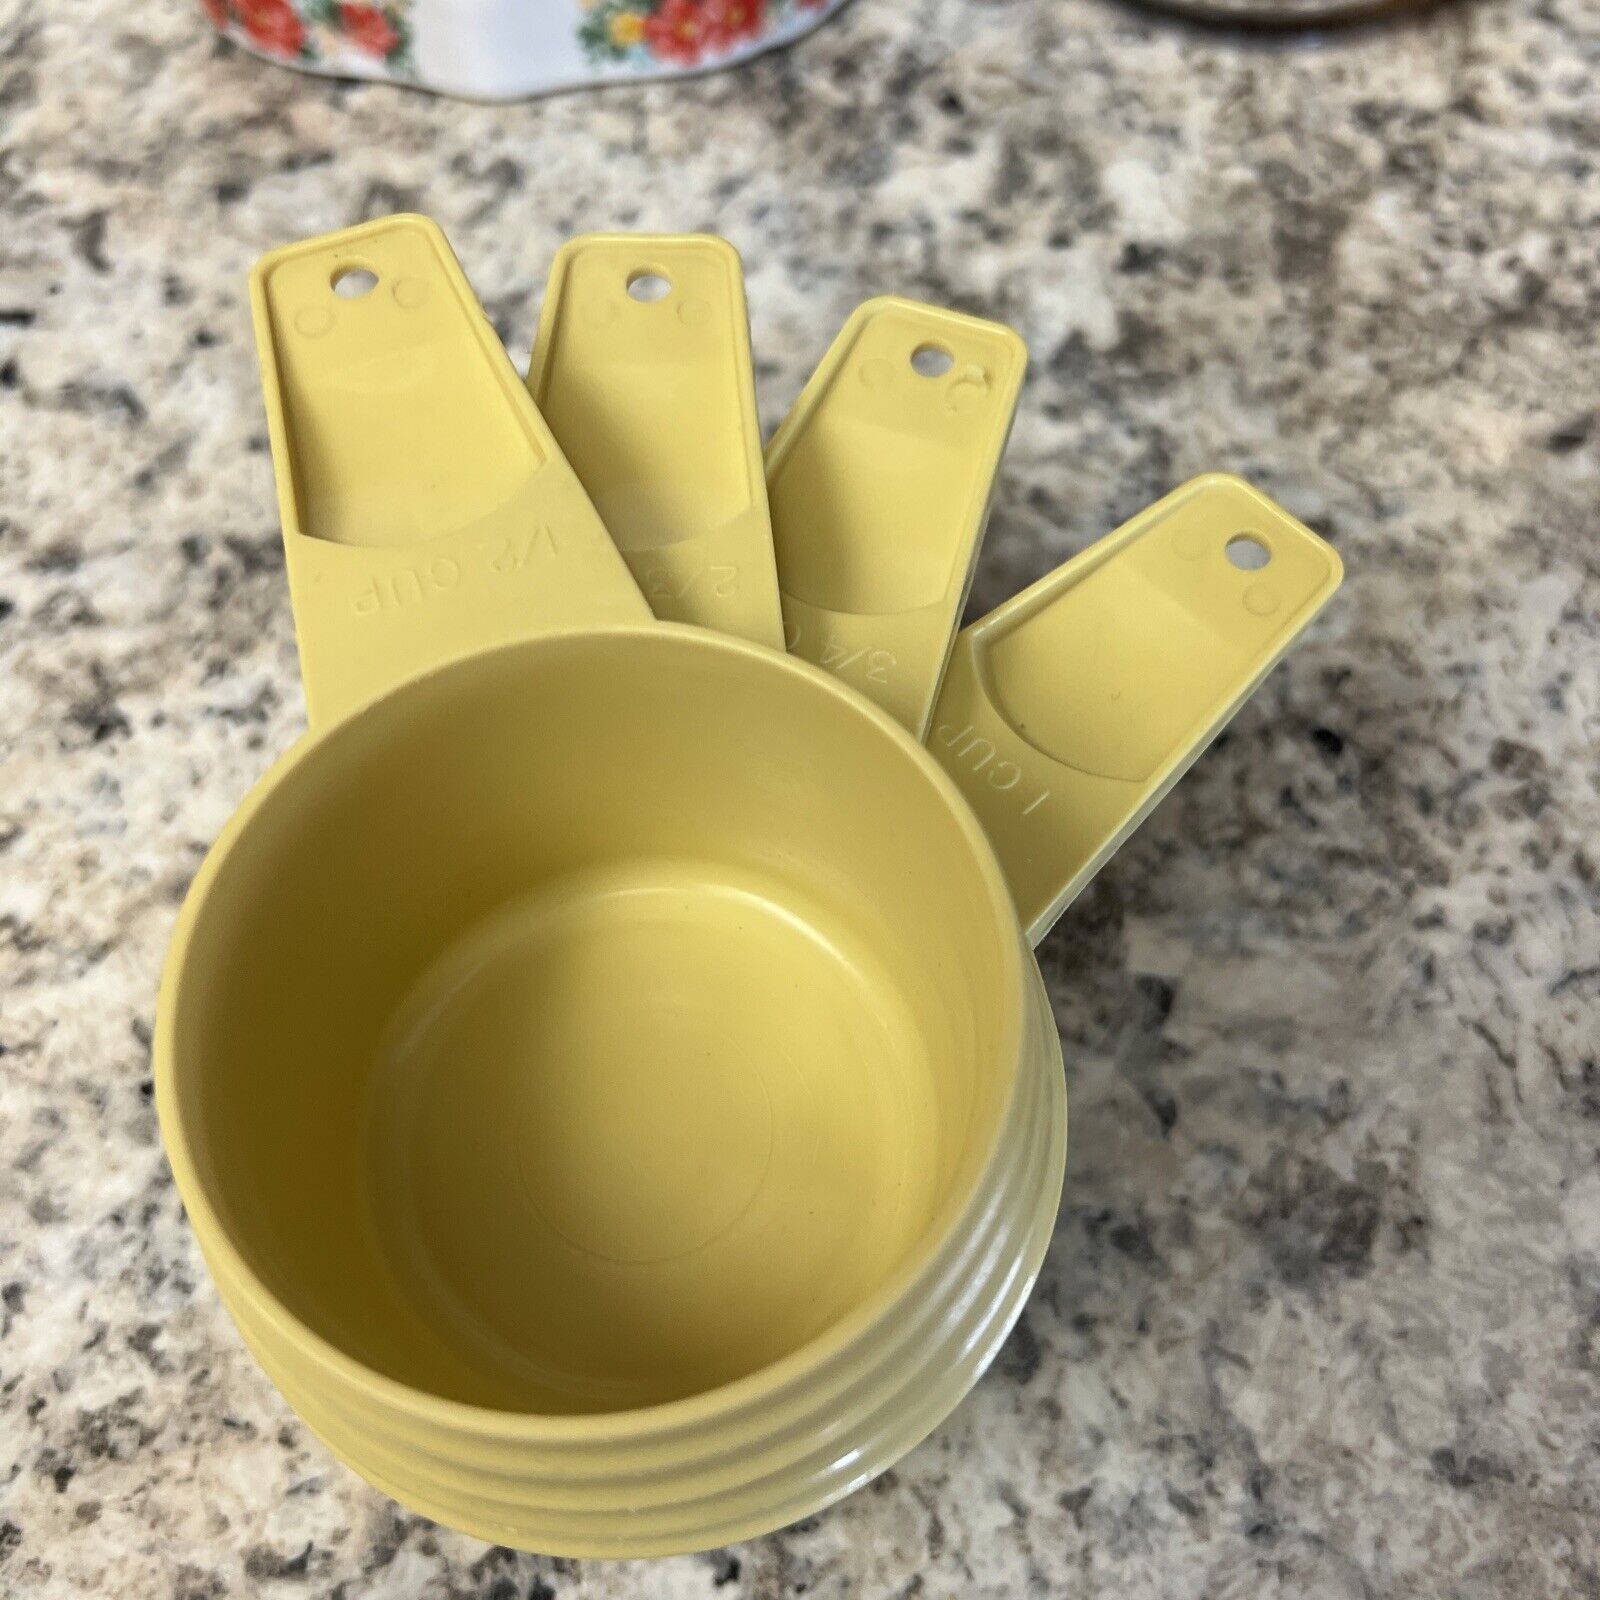 4 Vintage Tuppeware Harvest Yellow Measuring Cups - 1/2 Cup -1 Cup